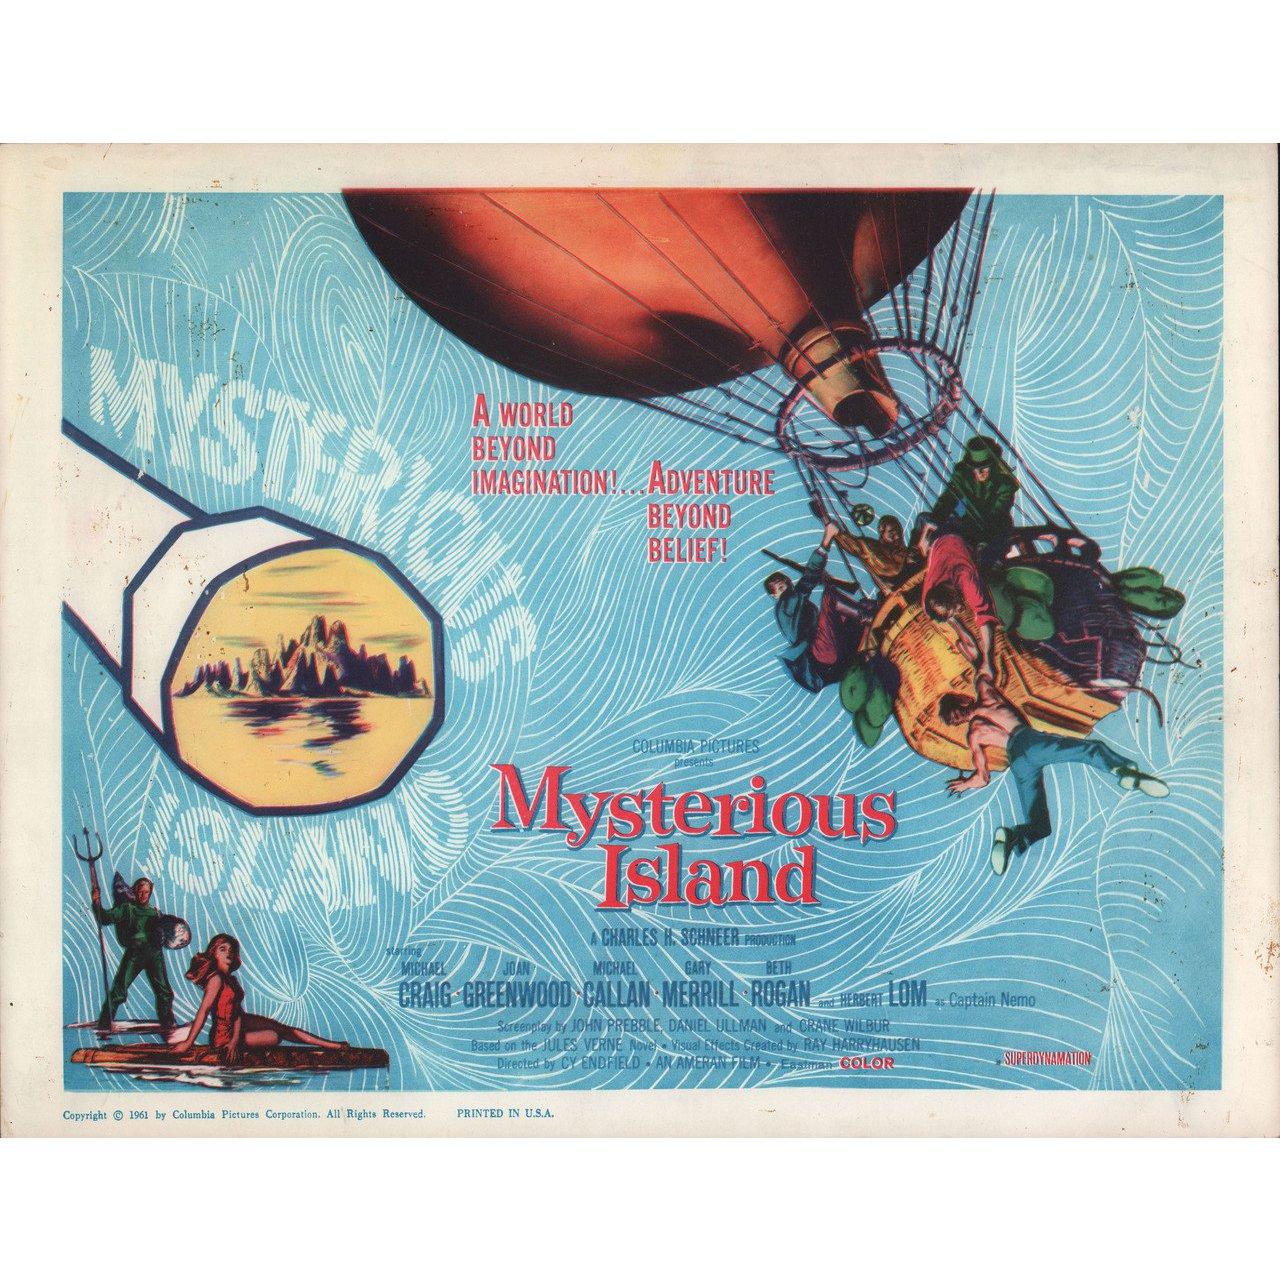 American “Mysterious Island” 1961 U.S. Title Card For Sale